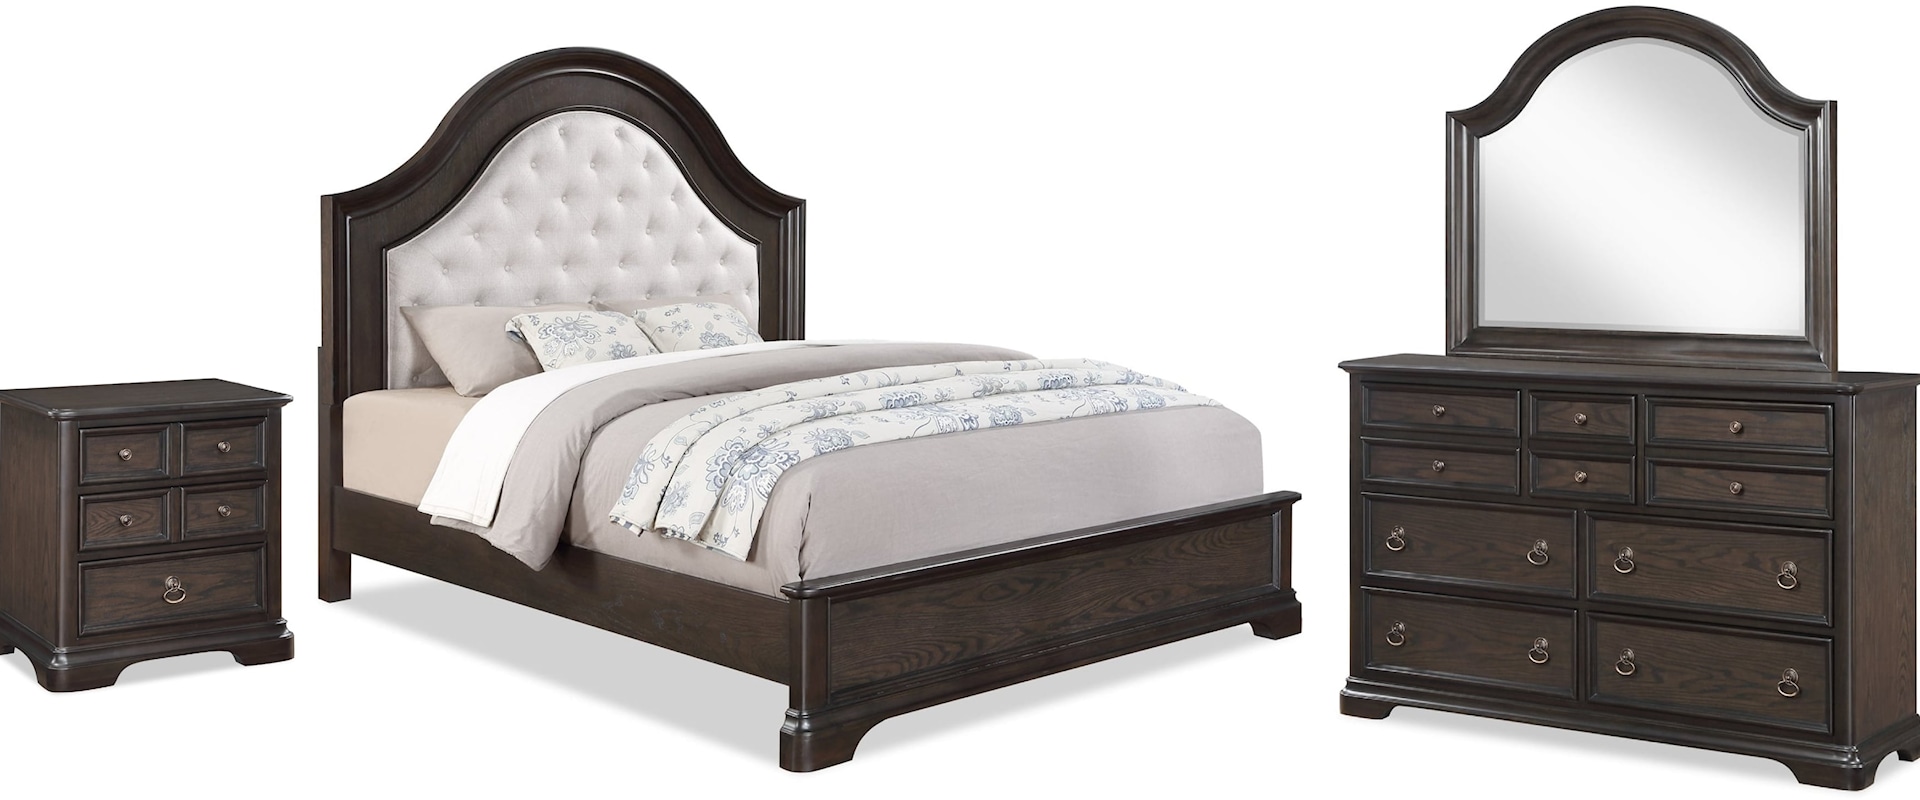 East King Bed Dresser Mirror and 1 Nightstand